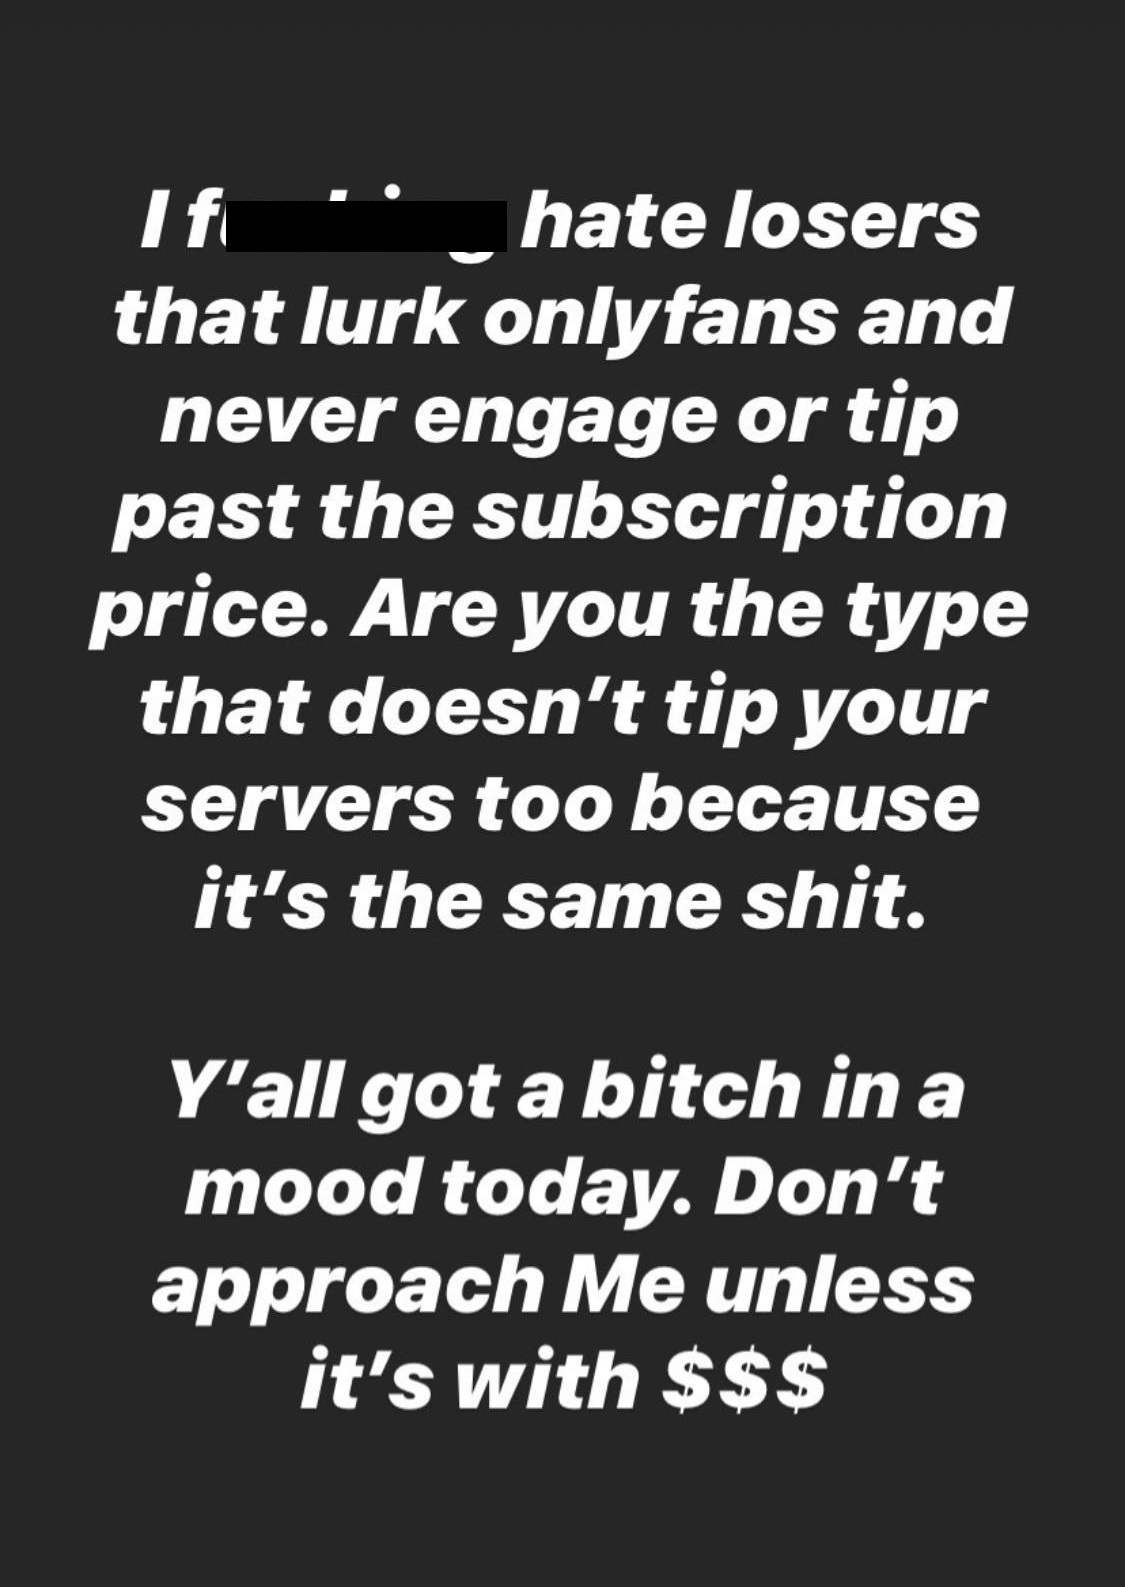 super entitled people - ciudad mitad del mundo - If hate losers that lurk onlyfans and never engage or tip past the subscription price. Are you the type that doesn't tip your servers too because it's the same shit. Y'all got a bitch in a mood today. Don't